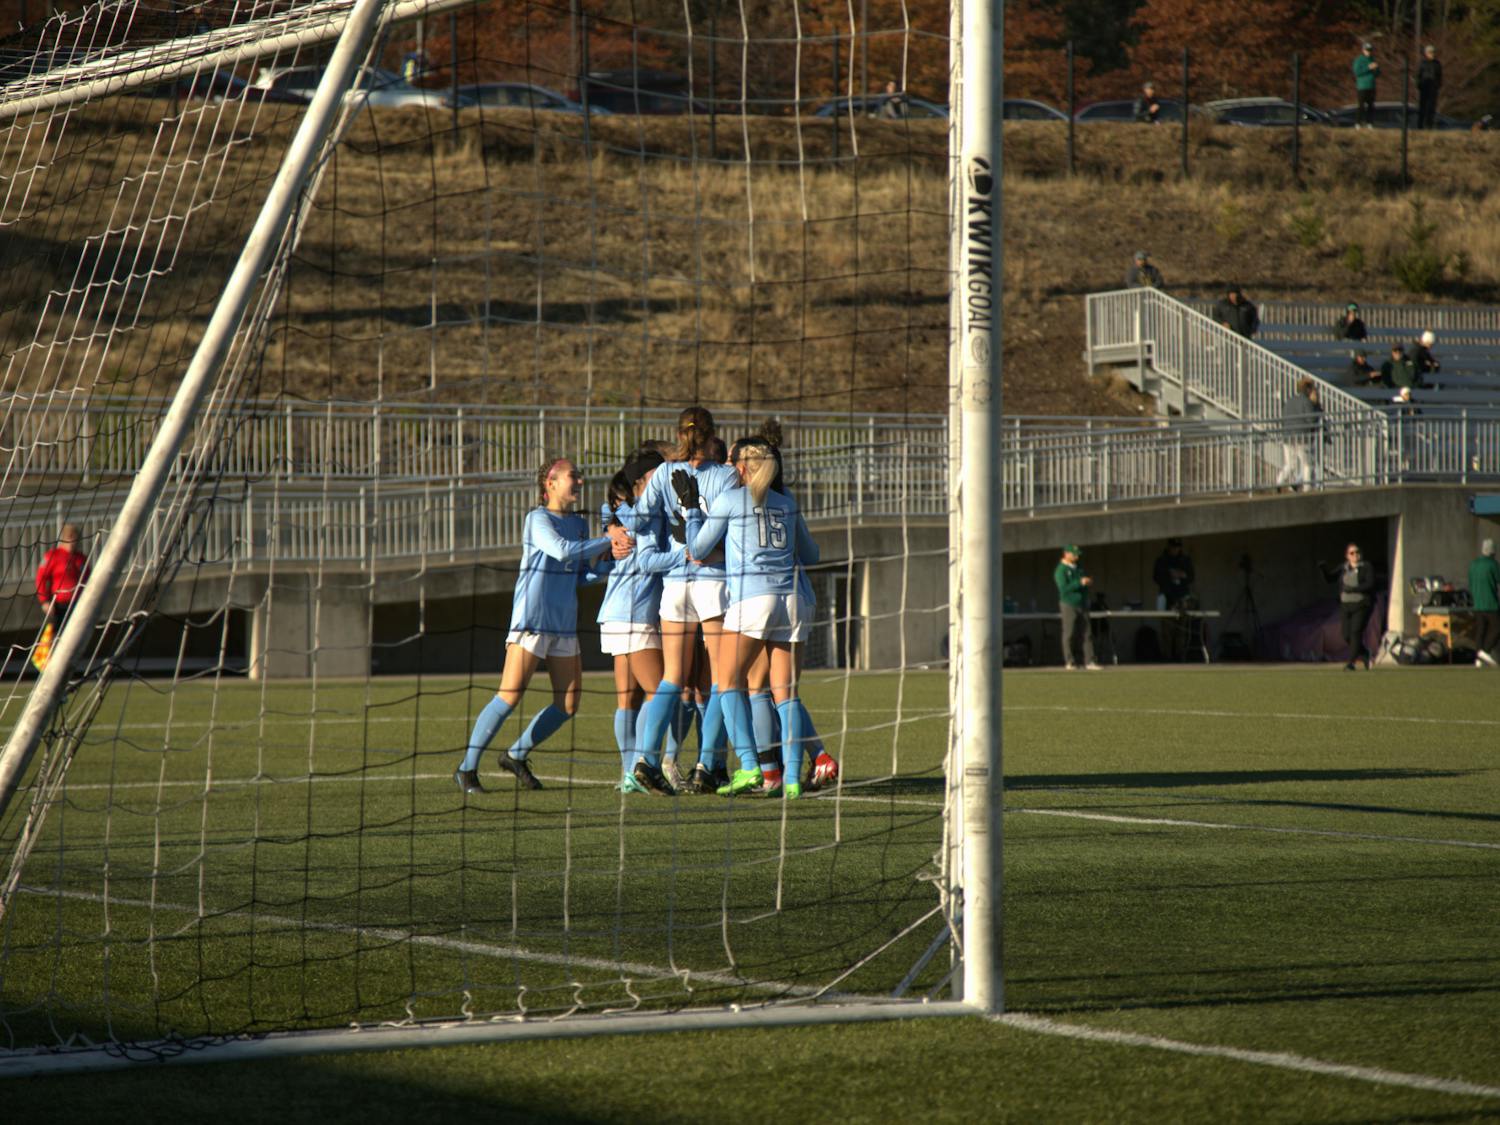 Western women’s soccer team celebrates after an early goal from Morgan Manalili in their game against Concordia University Irvine on Thursday, Nov. 17 at Harrington Field. The only score of the match led to a Viking victory and their fifth regional Division II championship in program history. // Photo by Jack Glenn